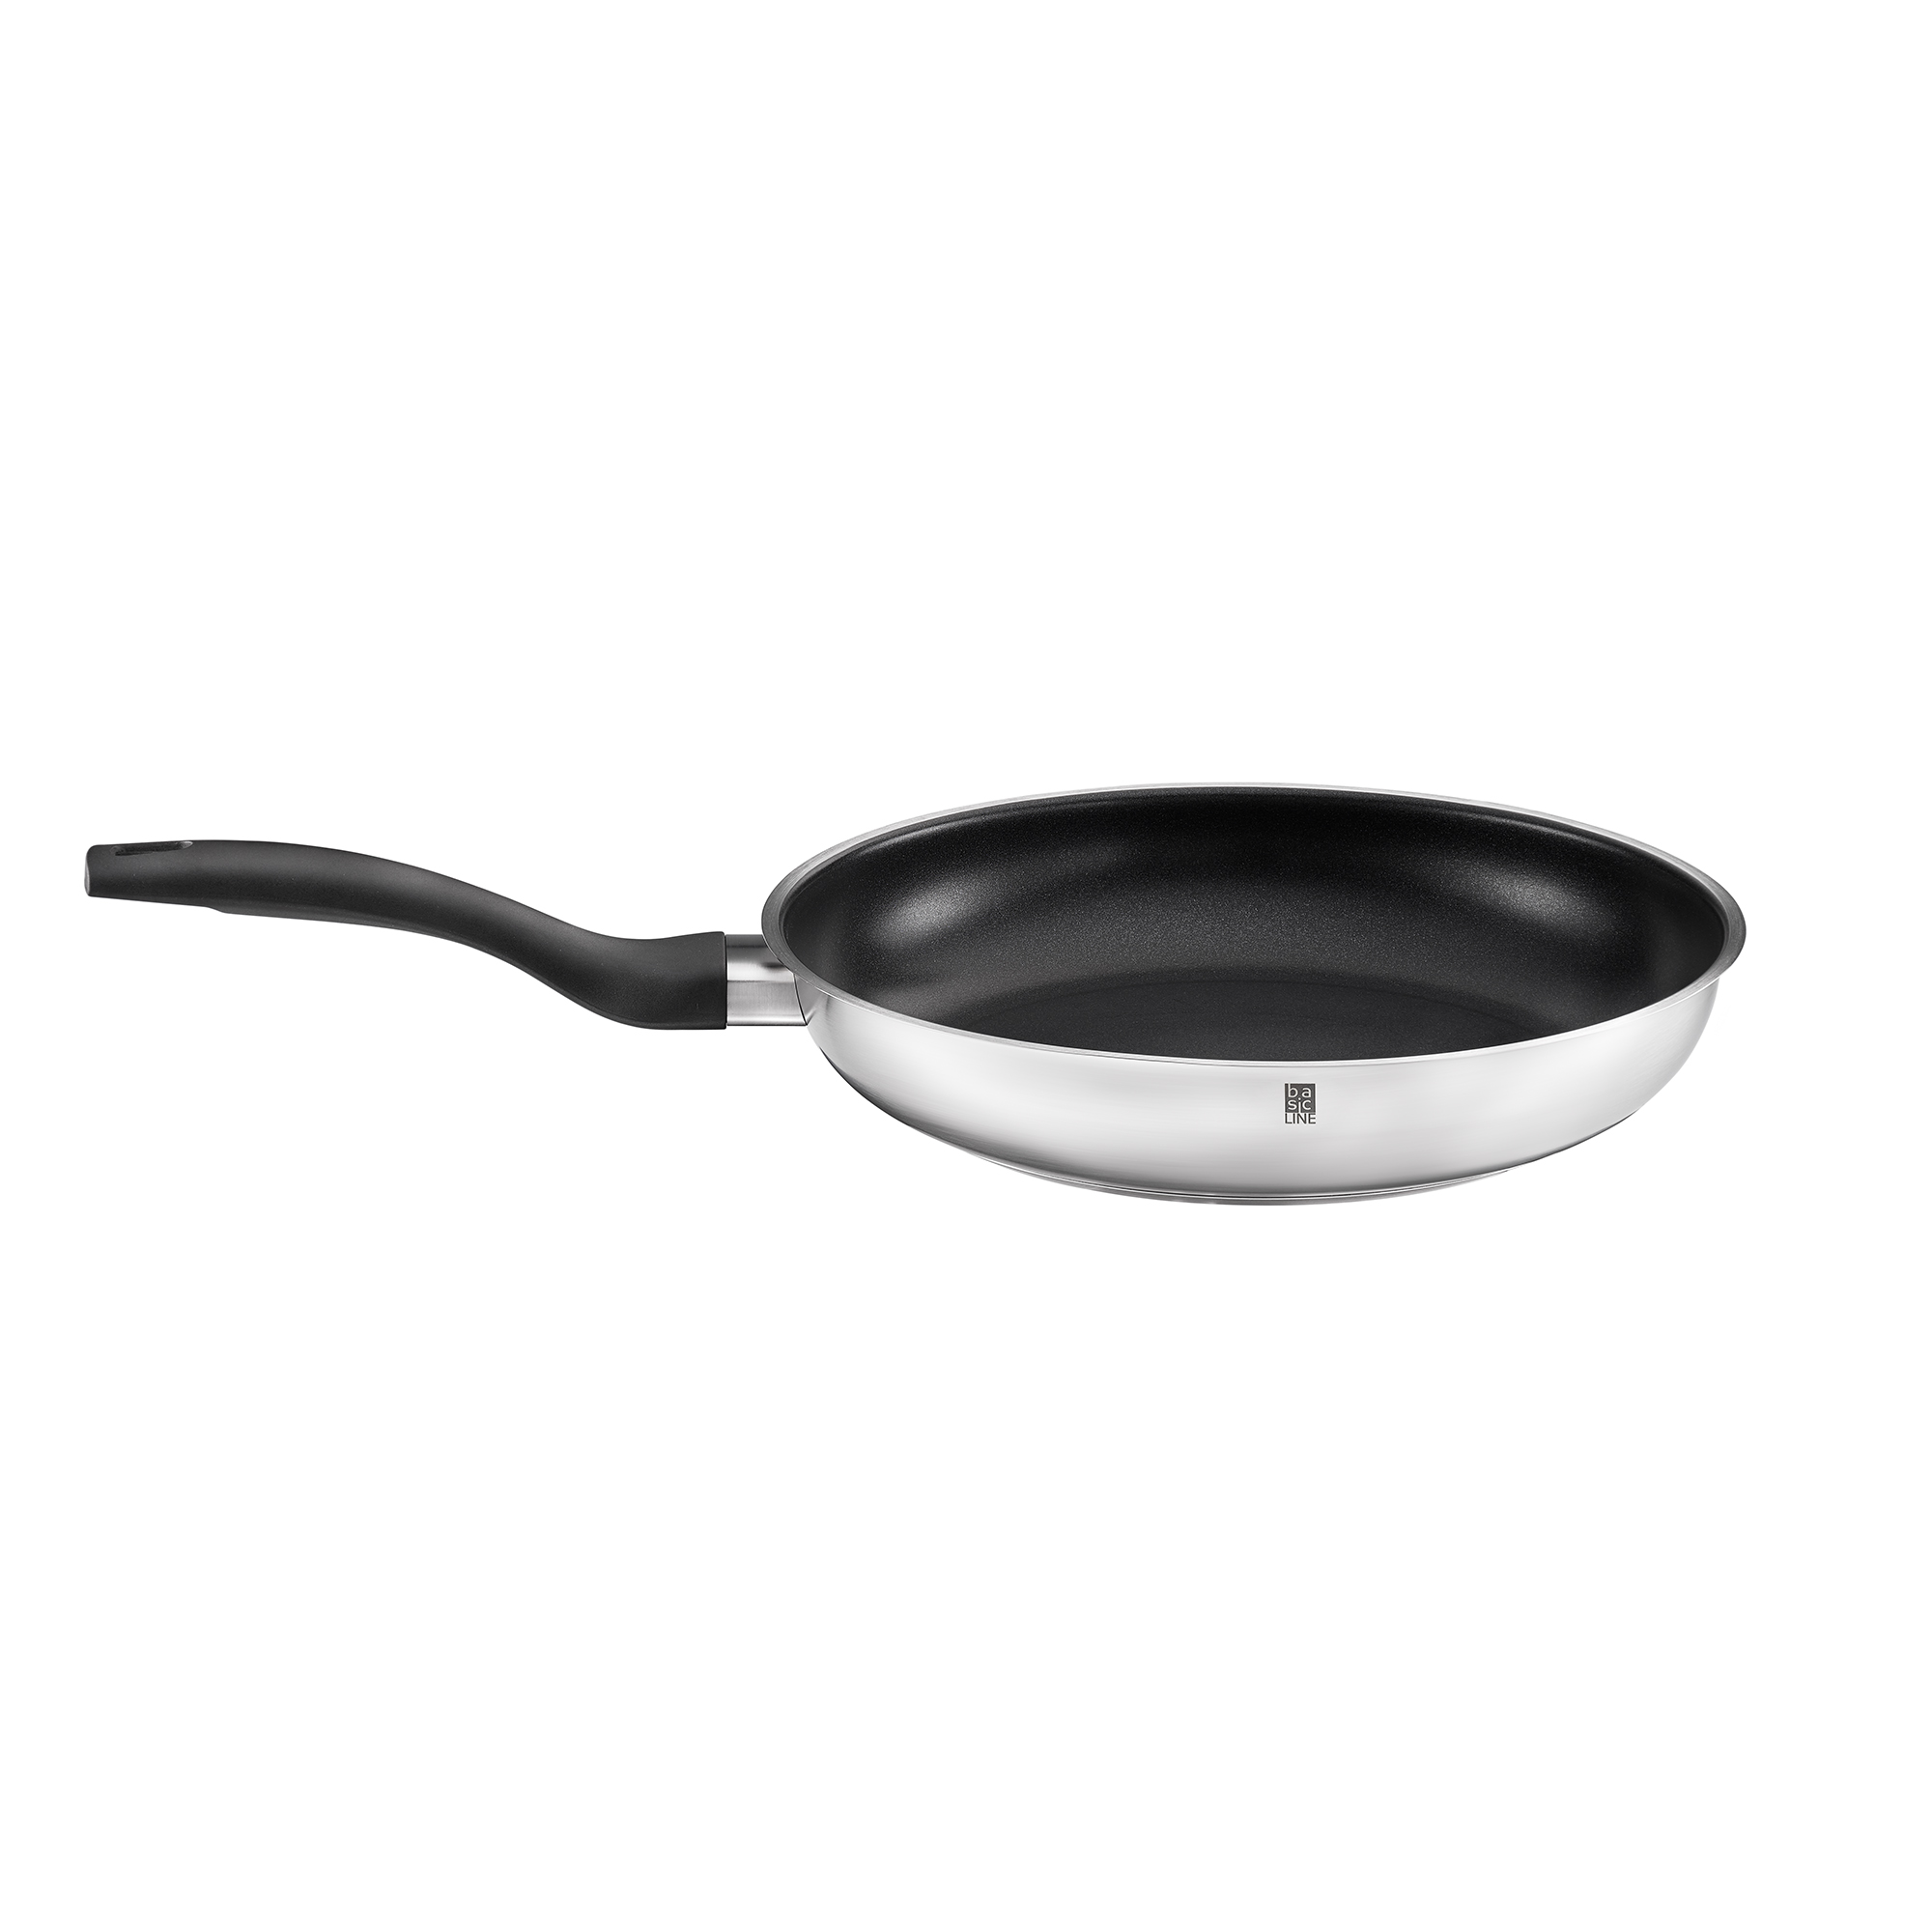 Frying pan "Basic Line" Ø 24 cm I 9.5 in. with non-stick coating ProPlex